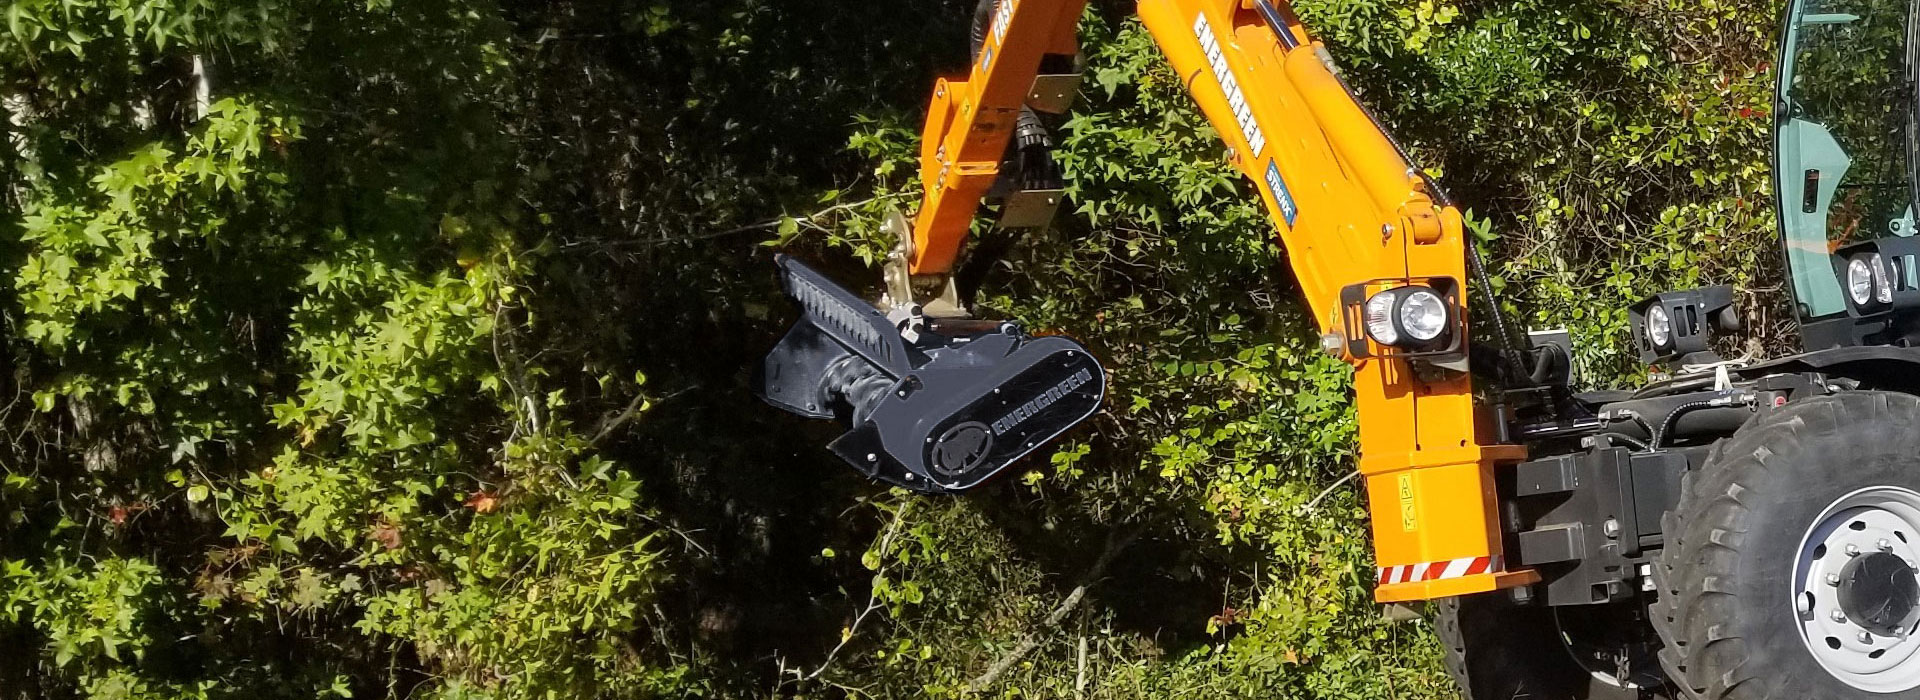 Energreen Forestry Head Attachment